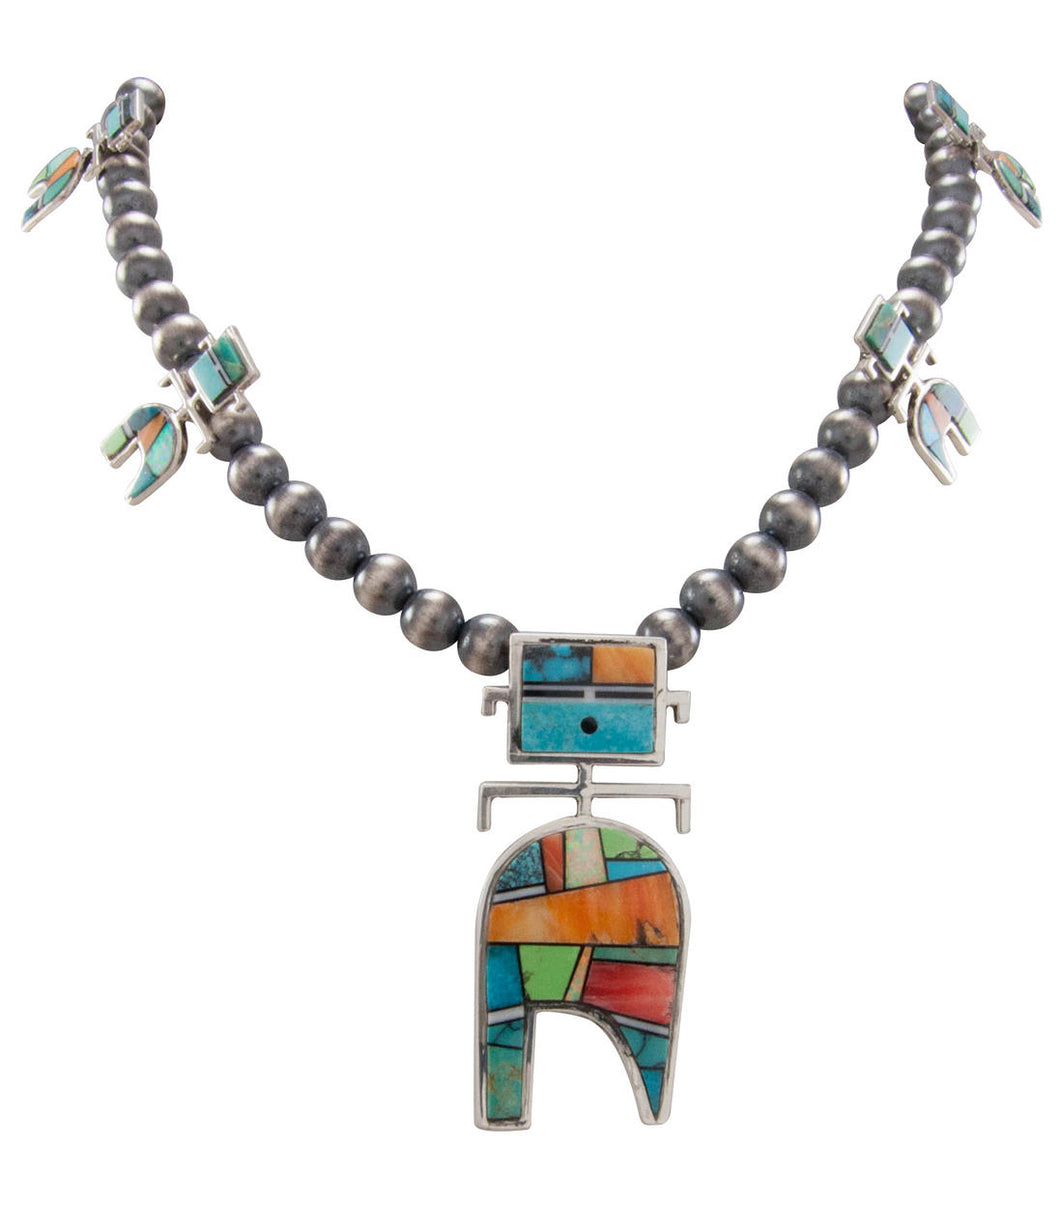 Navajo Native American Turquoise Inlay Yei Necklace by Alexius SKU230568